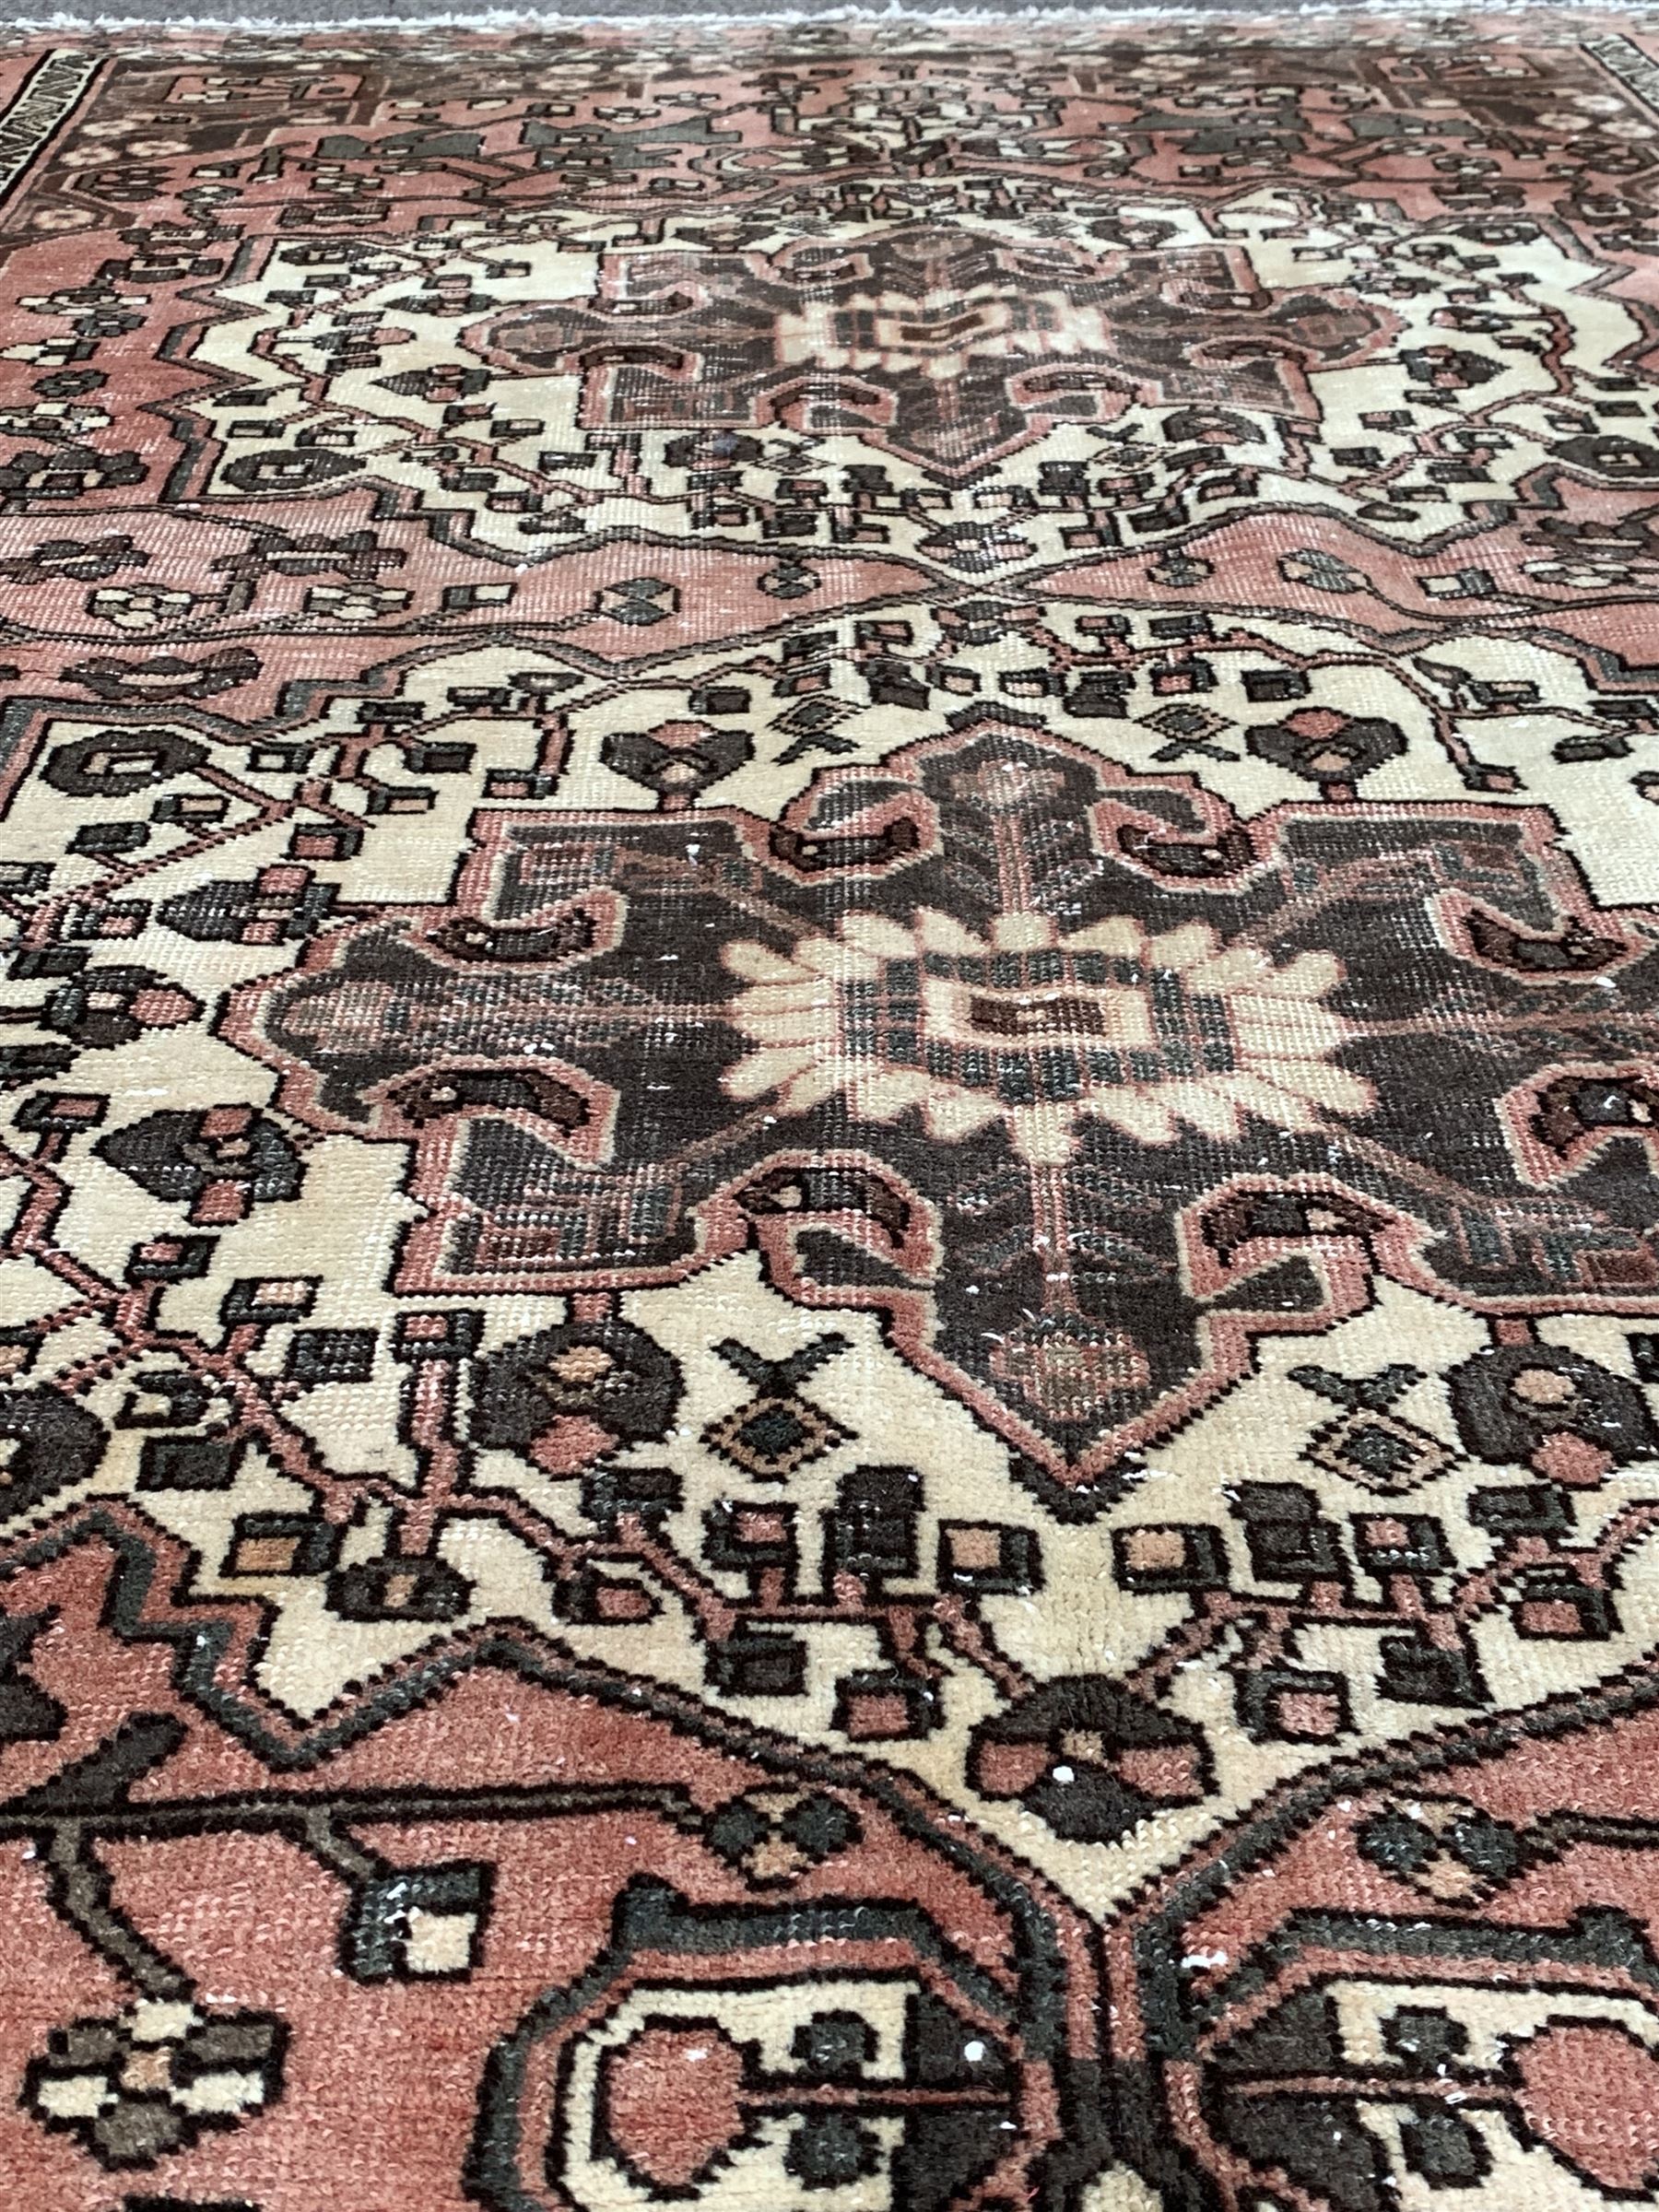 Vintage Persian faded red ground rug - Image 2 of 3